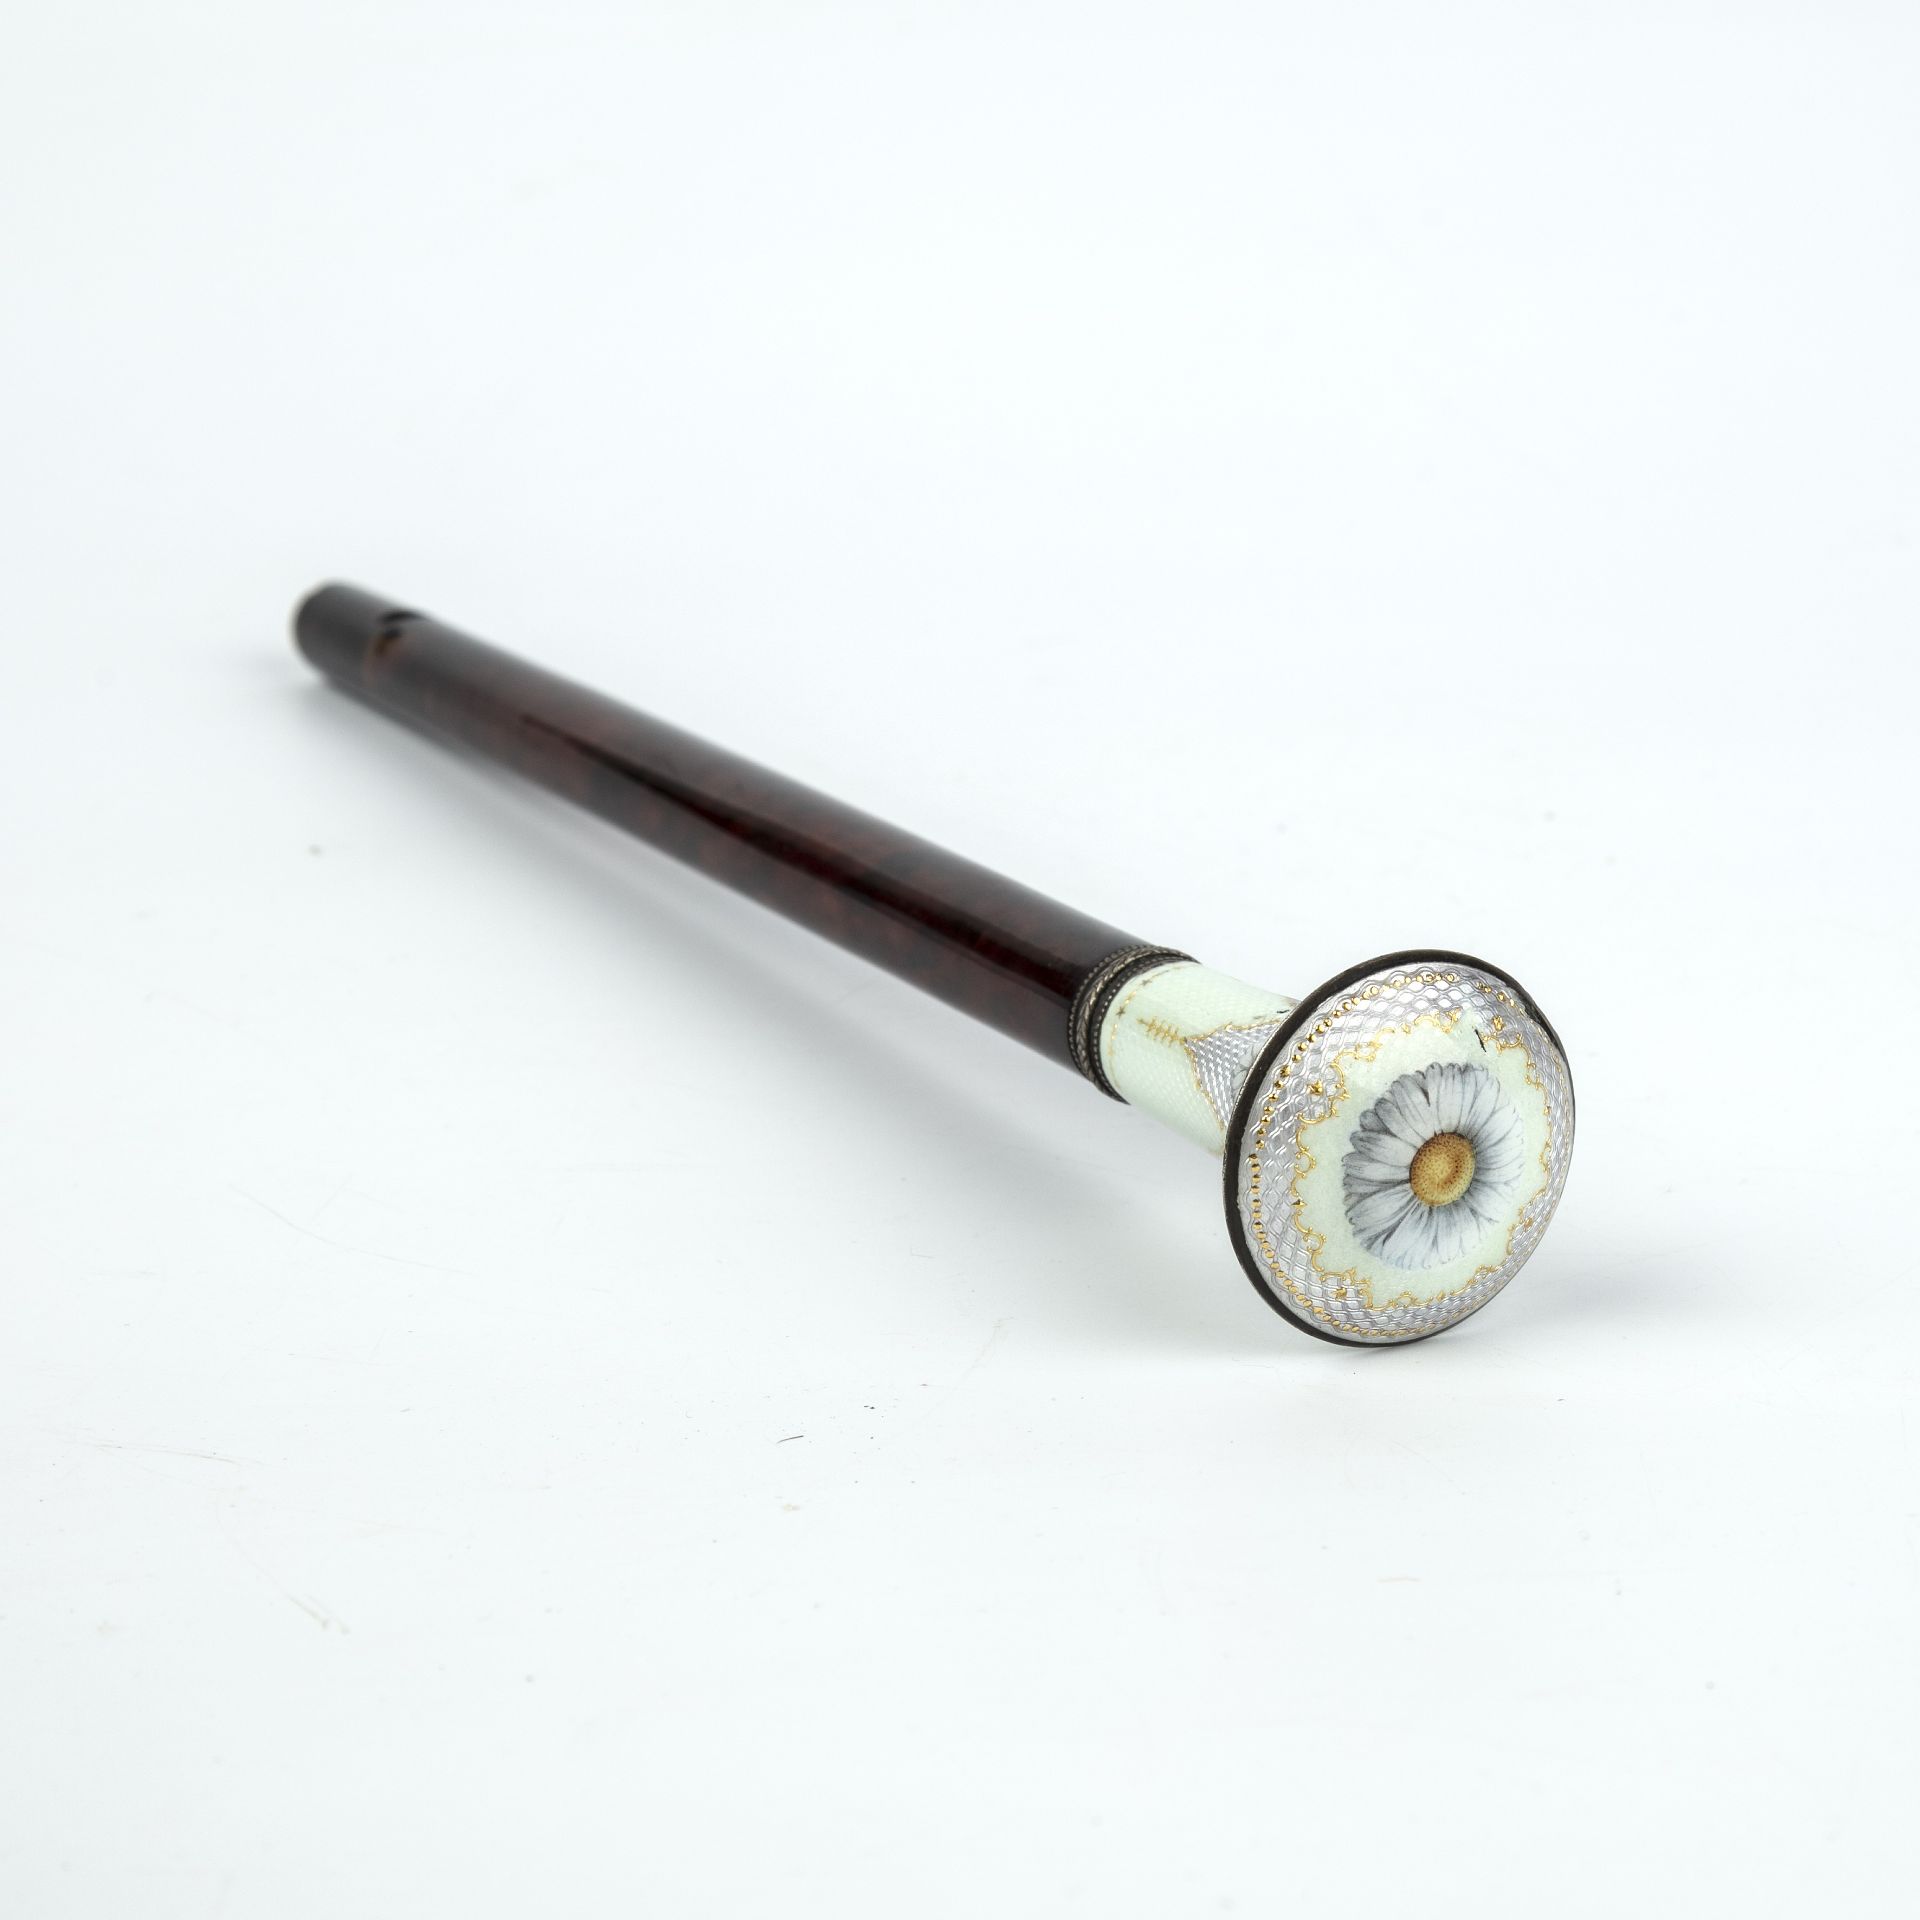 Late 19th century French tortoiseshell parasol handle with an enamelled top 28cm - Image 3 of 3